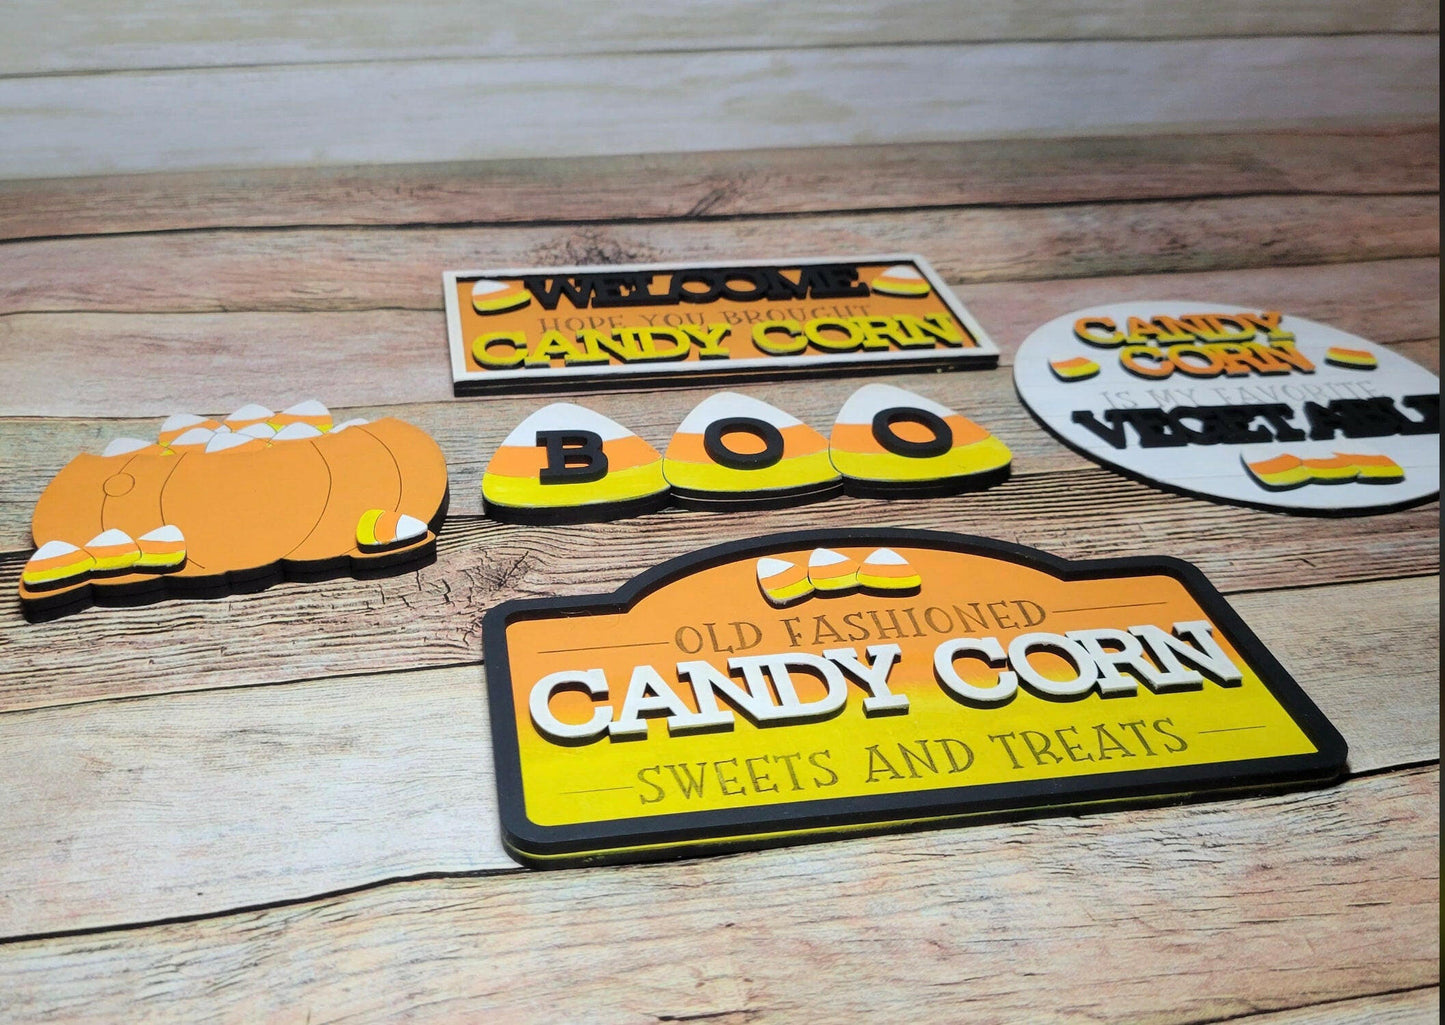 Candy Corn Tiered Tray SVG, October Tiered Tray SVG, Trick or Treat Tiered Tray SVG Laser File, Halloween Laser File, Pumpkin Tiered Tray